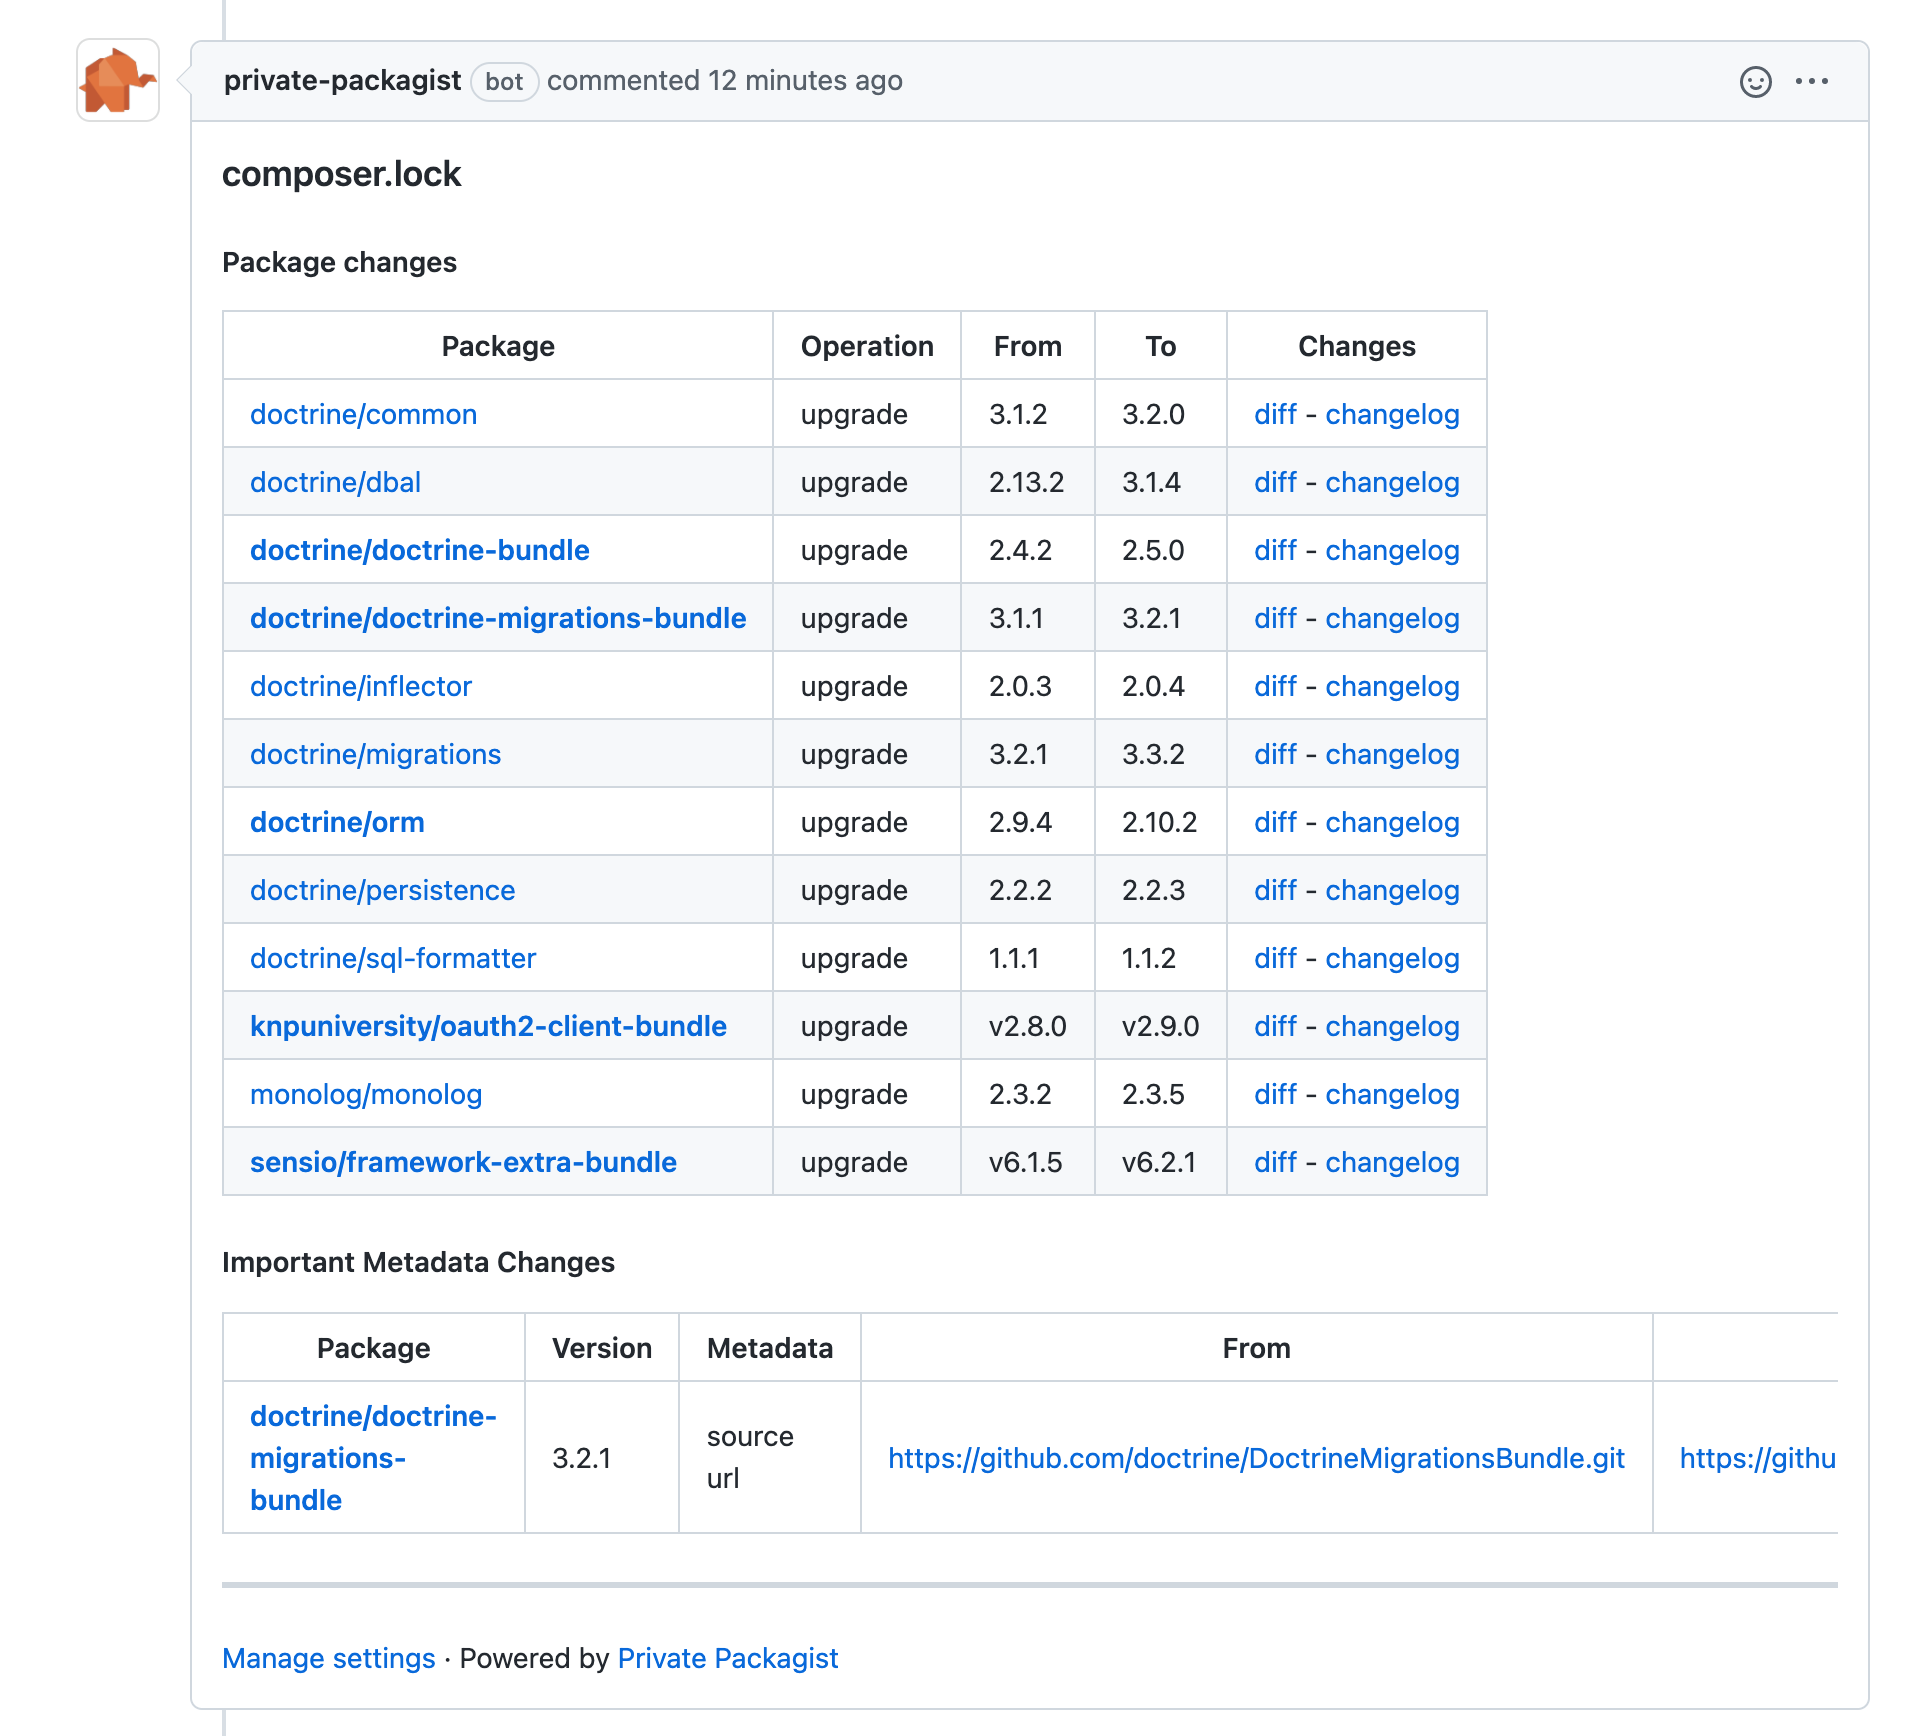 Screenshot of GitHub pull request with a comment by the Private Packagist bot